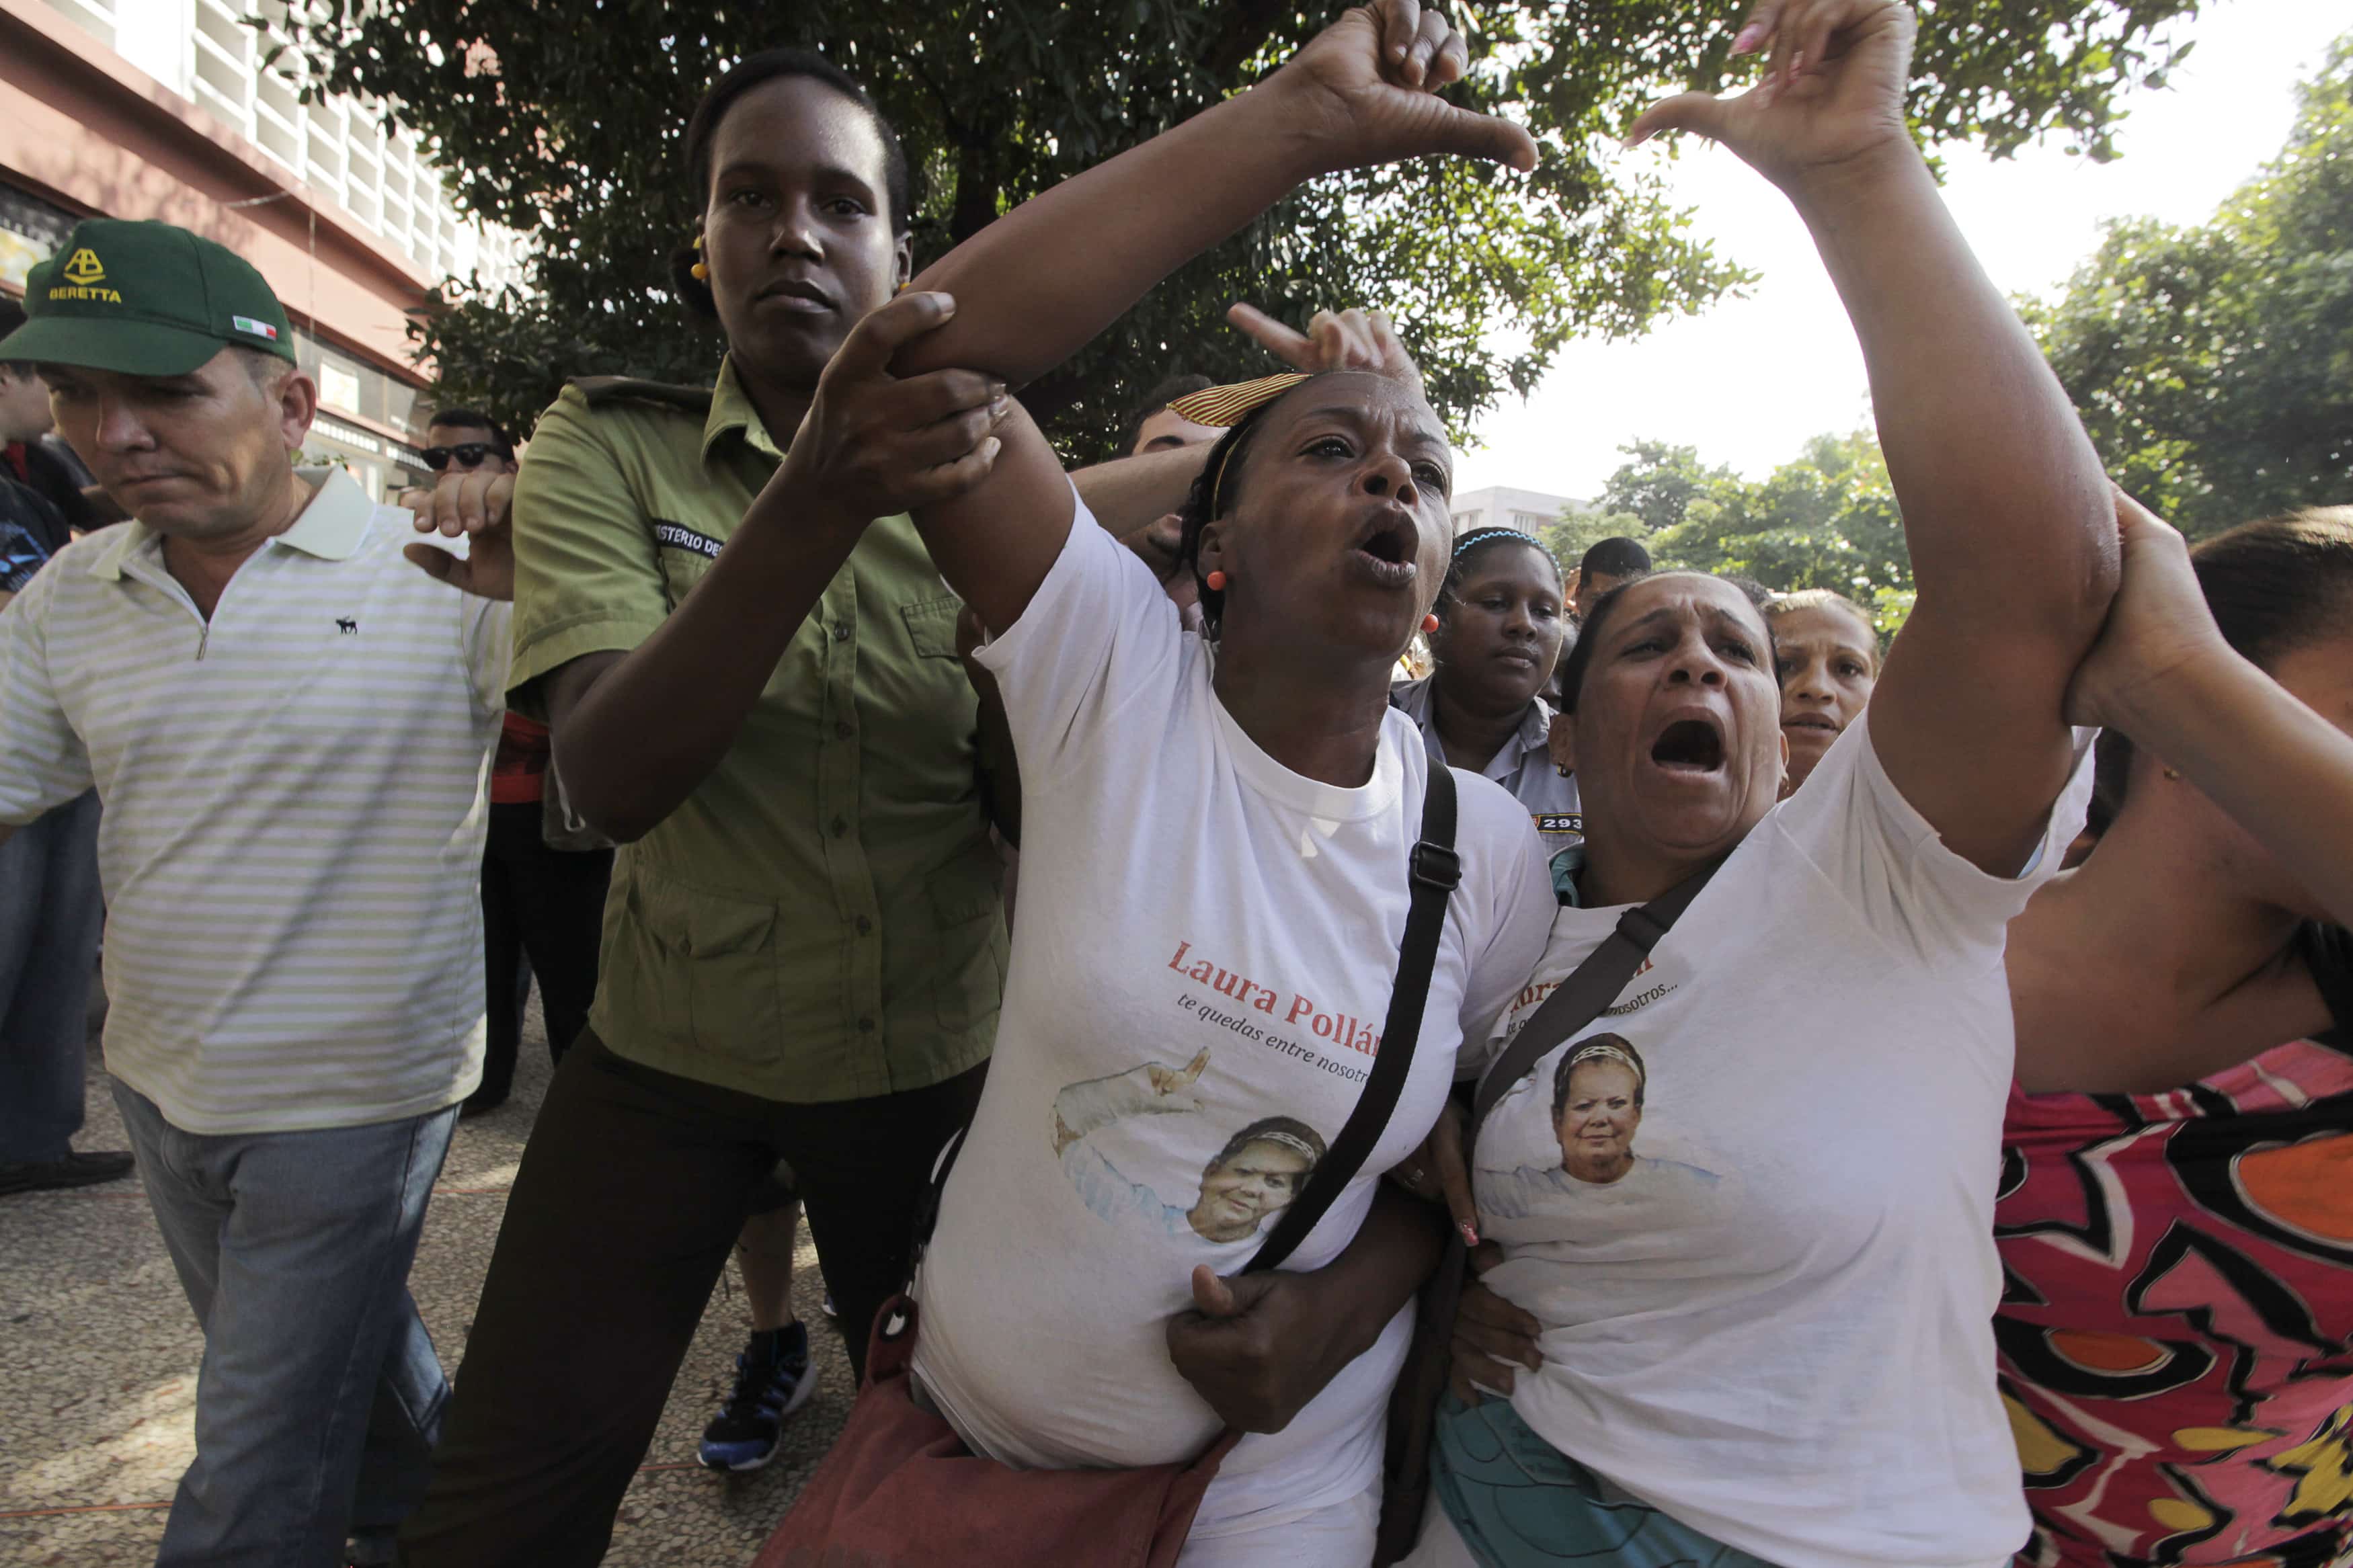 Members of the Ladies in White group shout anti-communism slogans during a protest on International Human Rights Day, in Havana, 10 December 2013. The group is made up of female family members of imprisoned dissidents, REUTERS/Enrique de la Osa